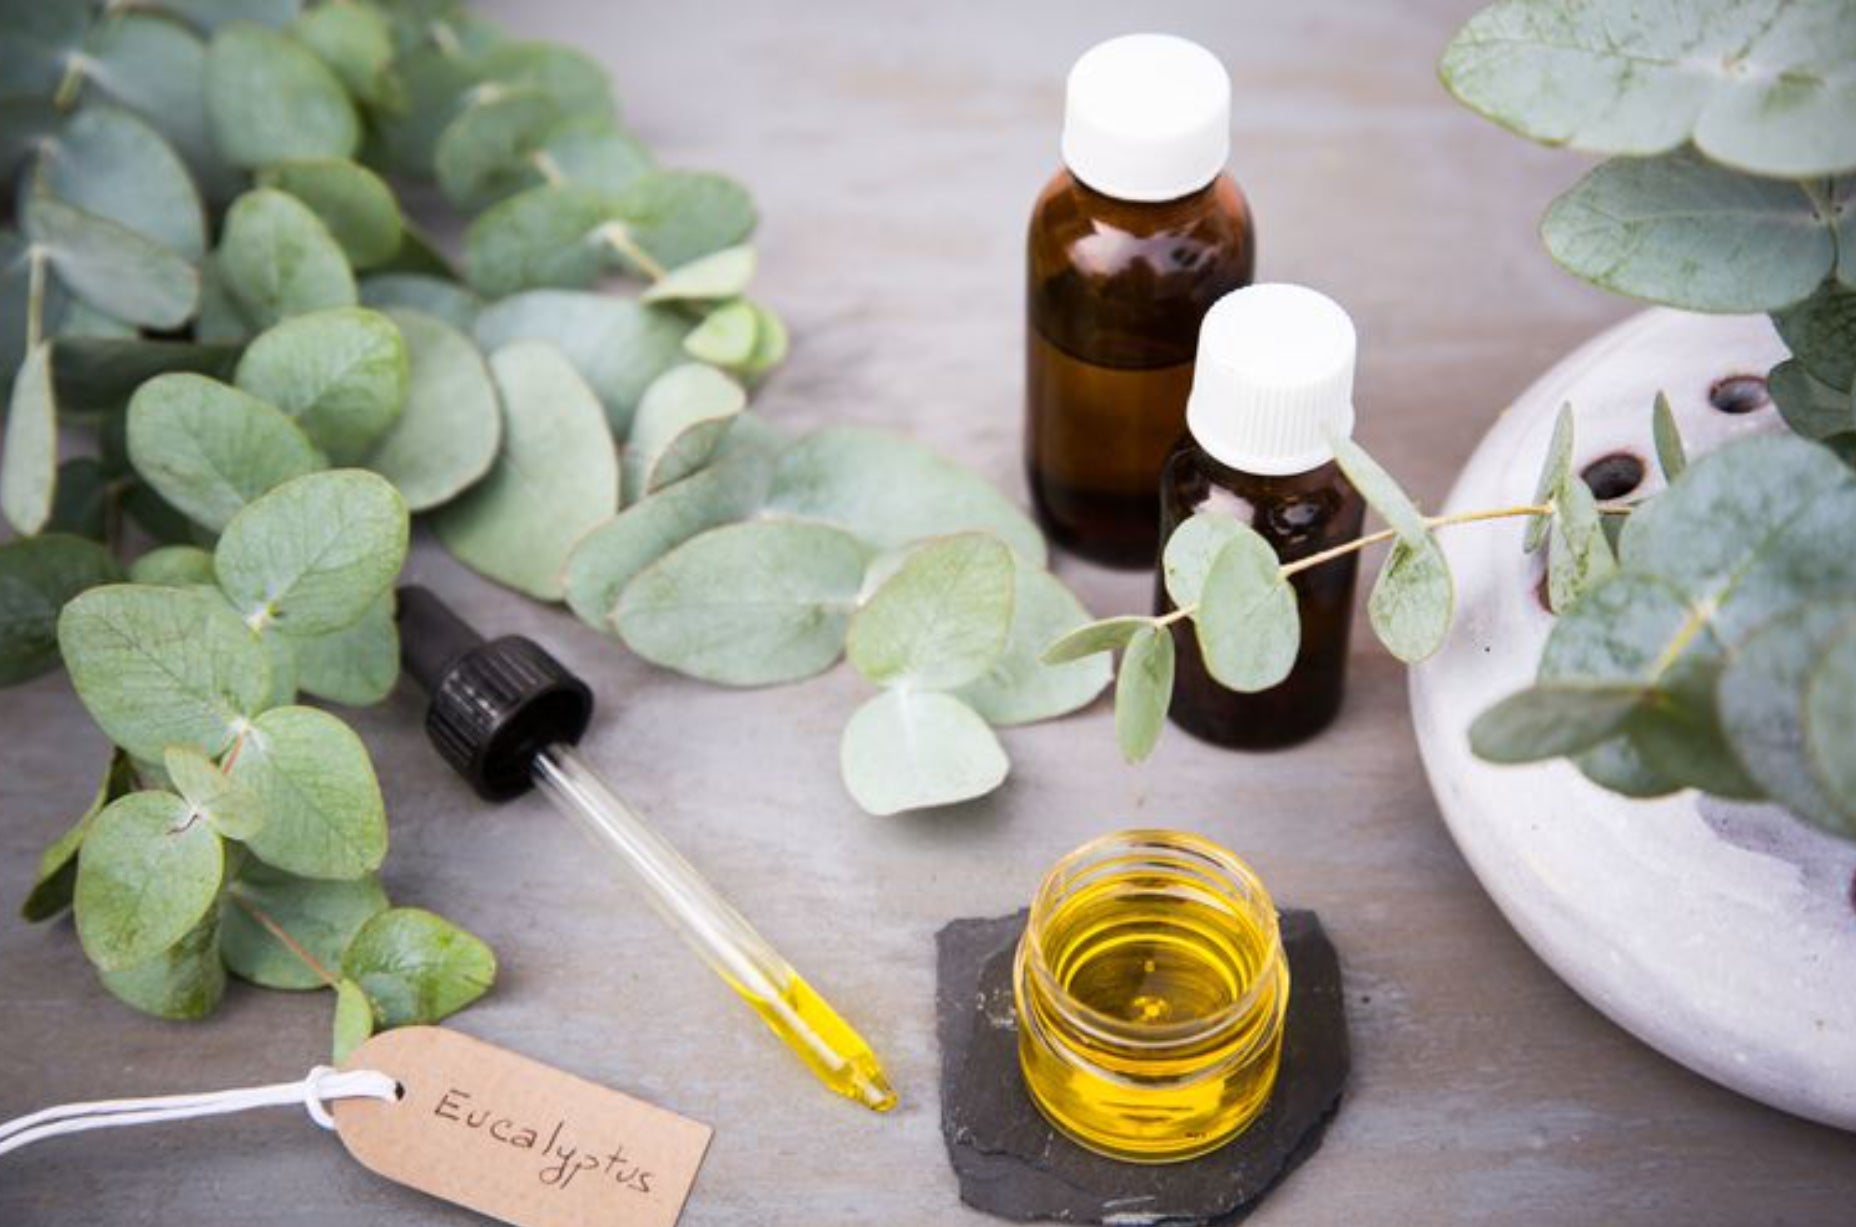 7 Top essential oils for your mental health